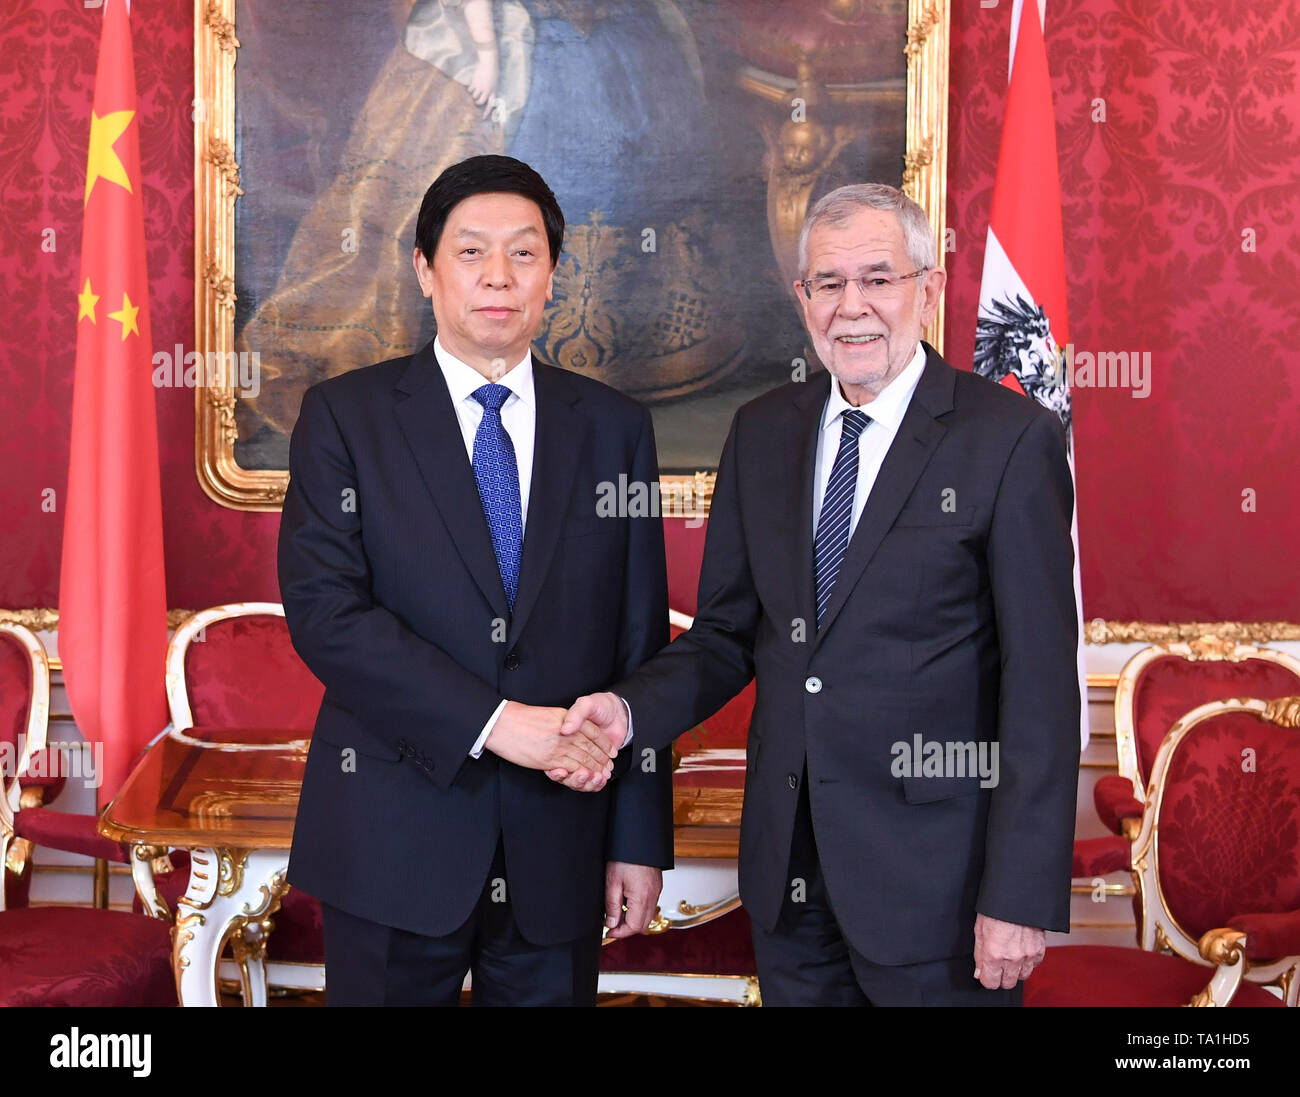 Vienna, Austria. 20th May, 2019. Li Zhanshu (L), chairman of the Standing Committee of the National People's Congress (NPC), meets with Austrian President Alexander Van der Bellen in Vienna, Austria, on May 20, 2019. China's top legislator Li Zhanshu paid an official friendly visit from May 18 to 21 to Austria, where he met with Austrian leaders on promoting bilateral ties and expressed China's stance on upholding multilateralism and free trade. Credit: Shen Hong/Xinhua/Alamy Live News Stock Photo